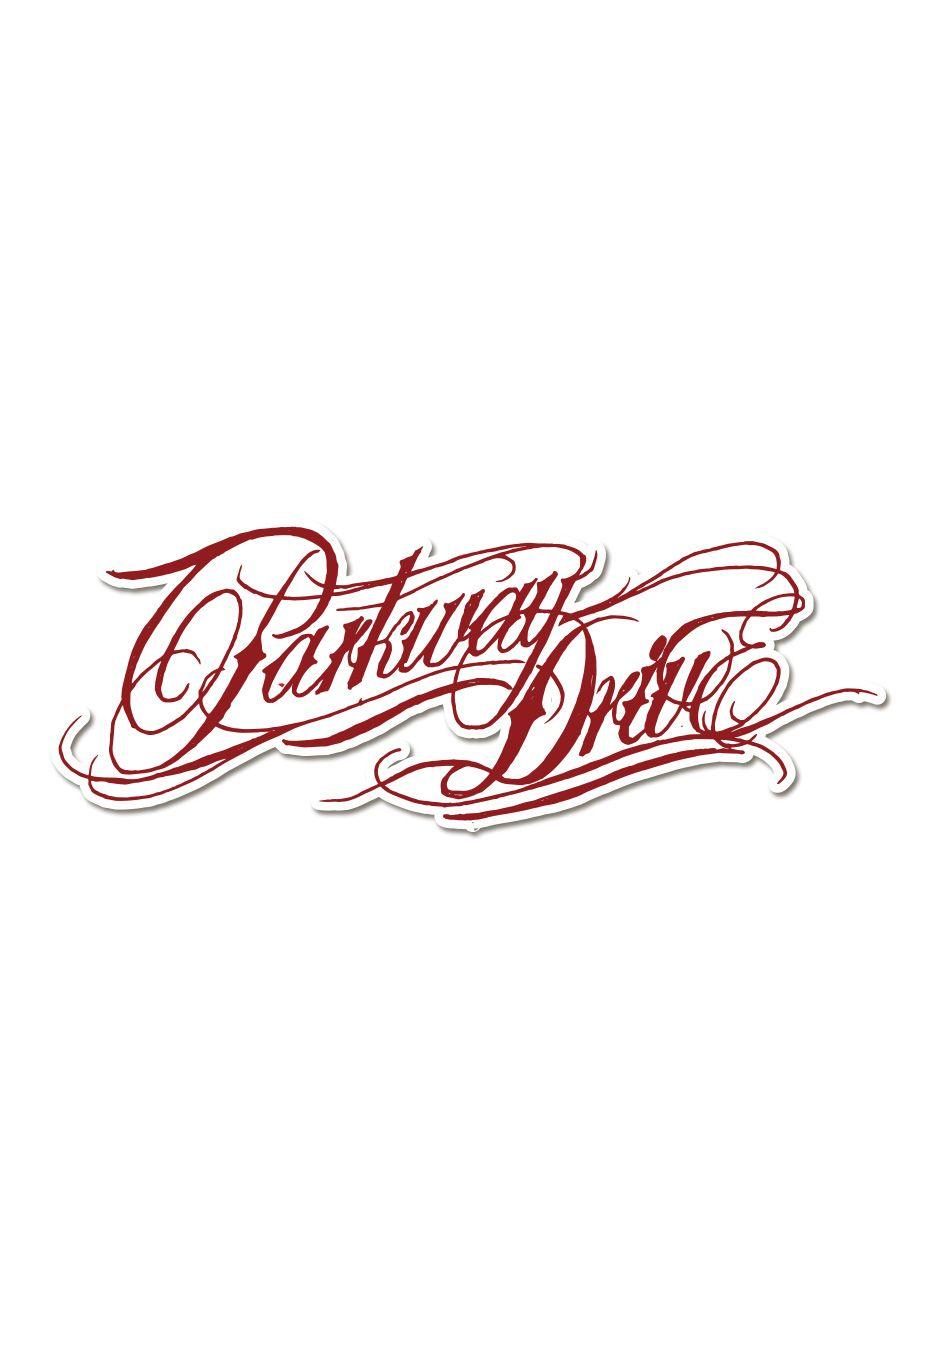 Parkway Drive Logo - Parkway Drive - Ire Logo Special Pack - T-Shirt - CDs, Vinyl and ...